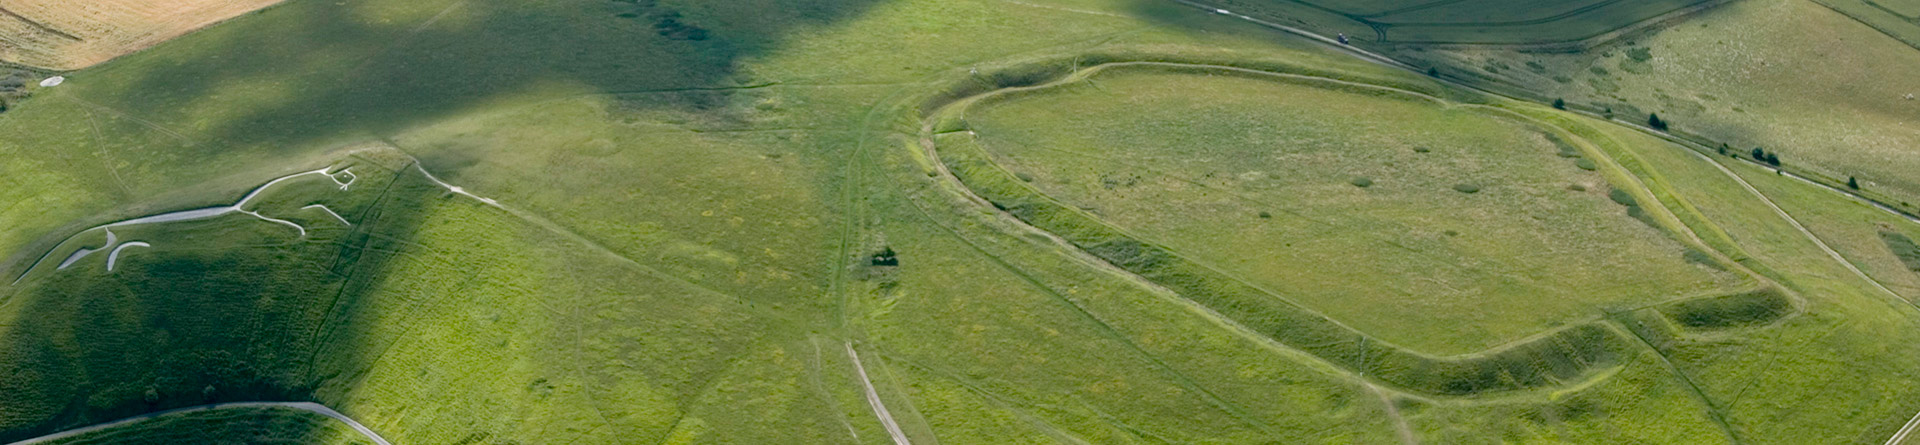 Colour aerial photograph showing a large banked earth enclosure to the right and a white chalk stylised figure of a horse left.